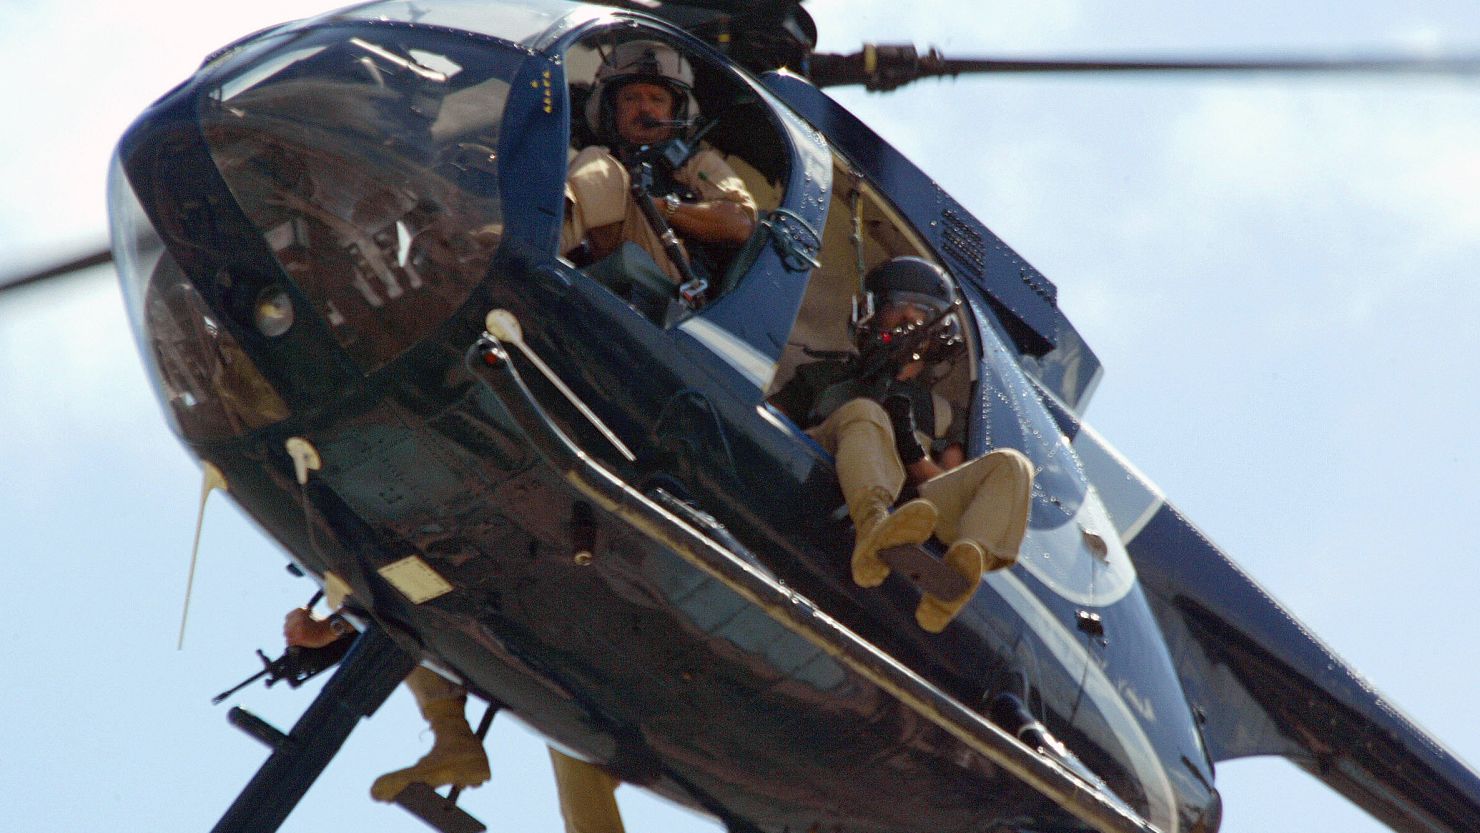 Members of Blackwater, a private U.S. security company, patrol over Baghdad in April 2004.